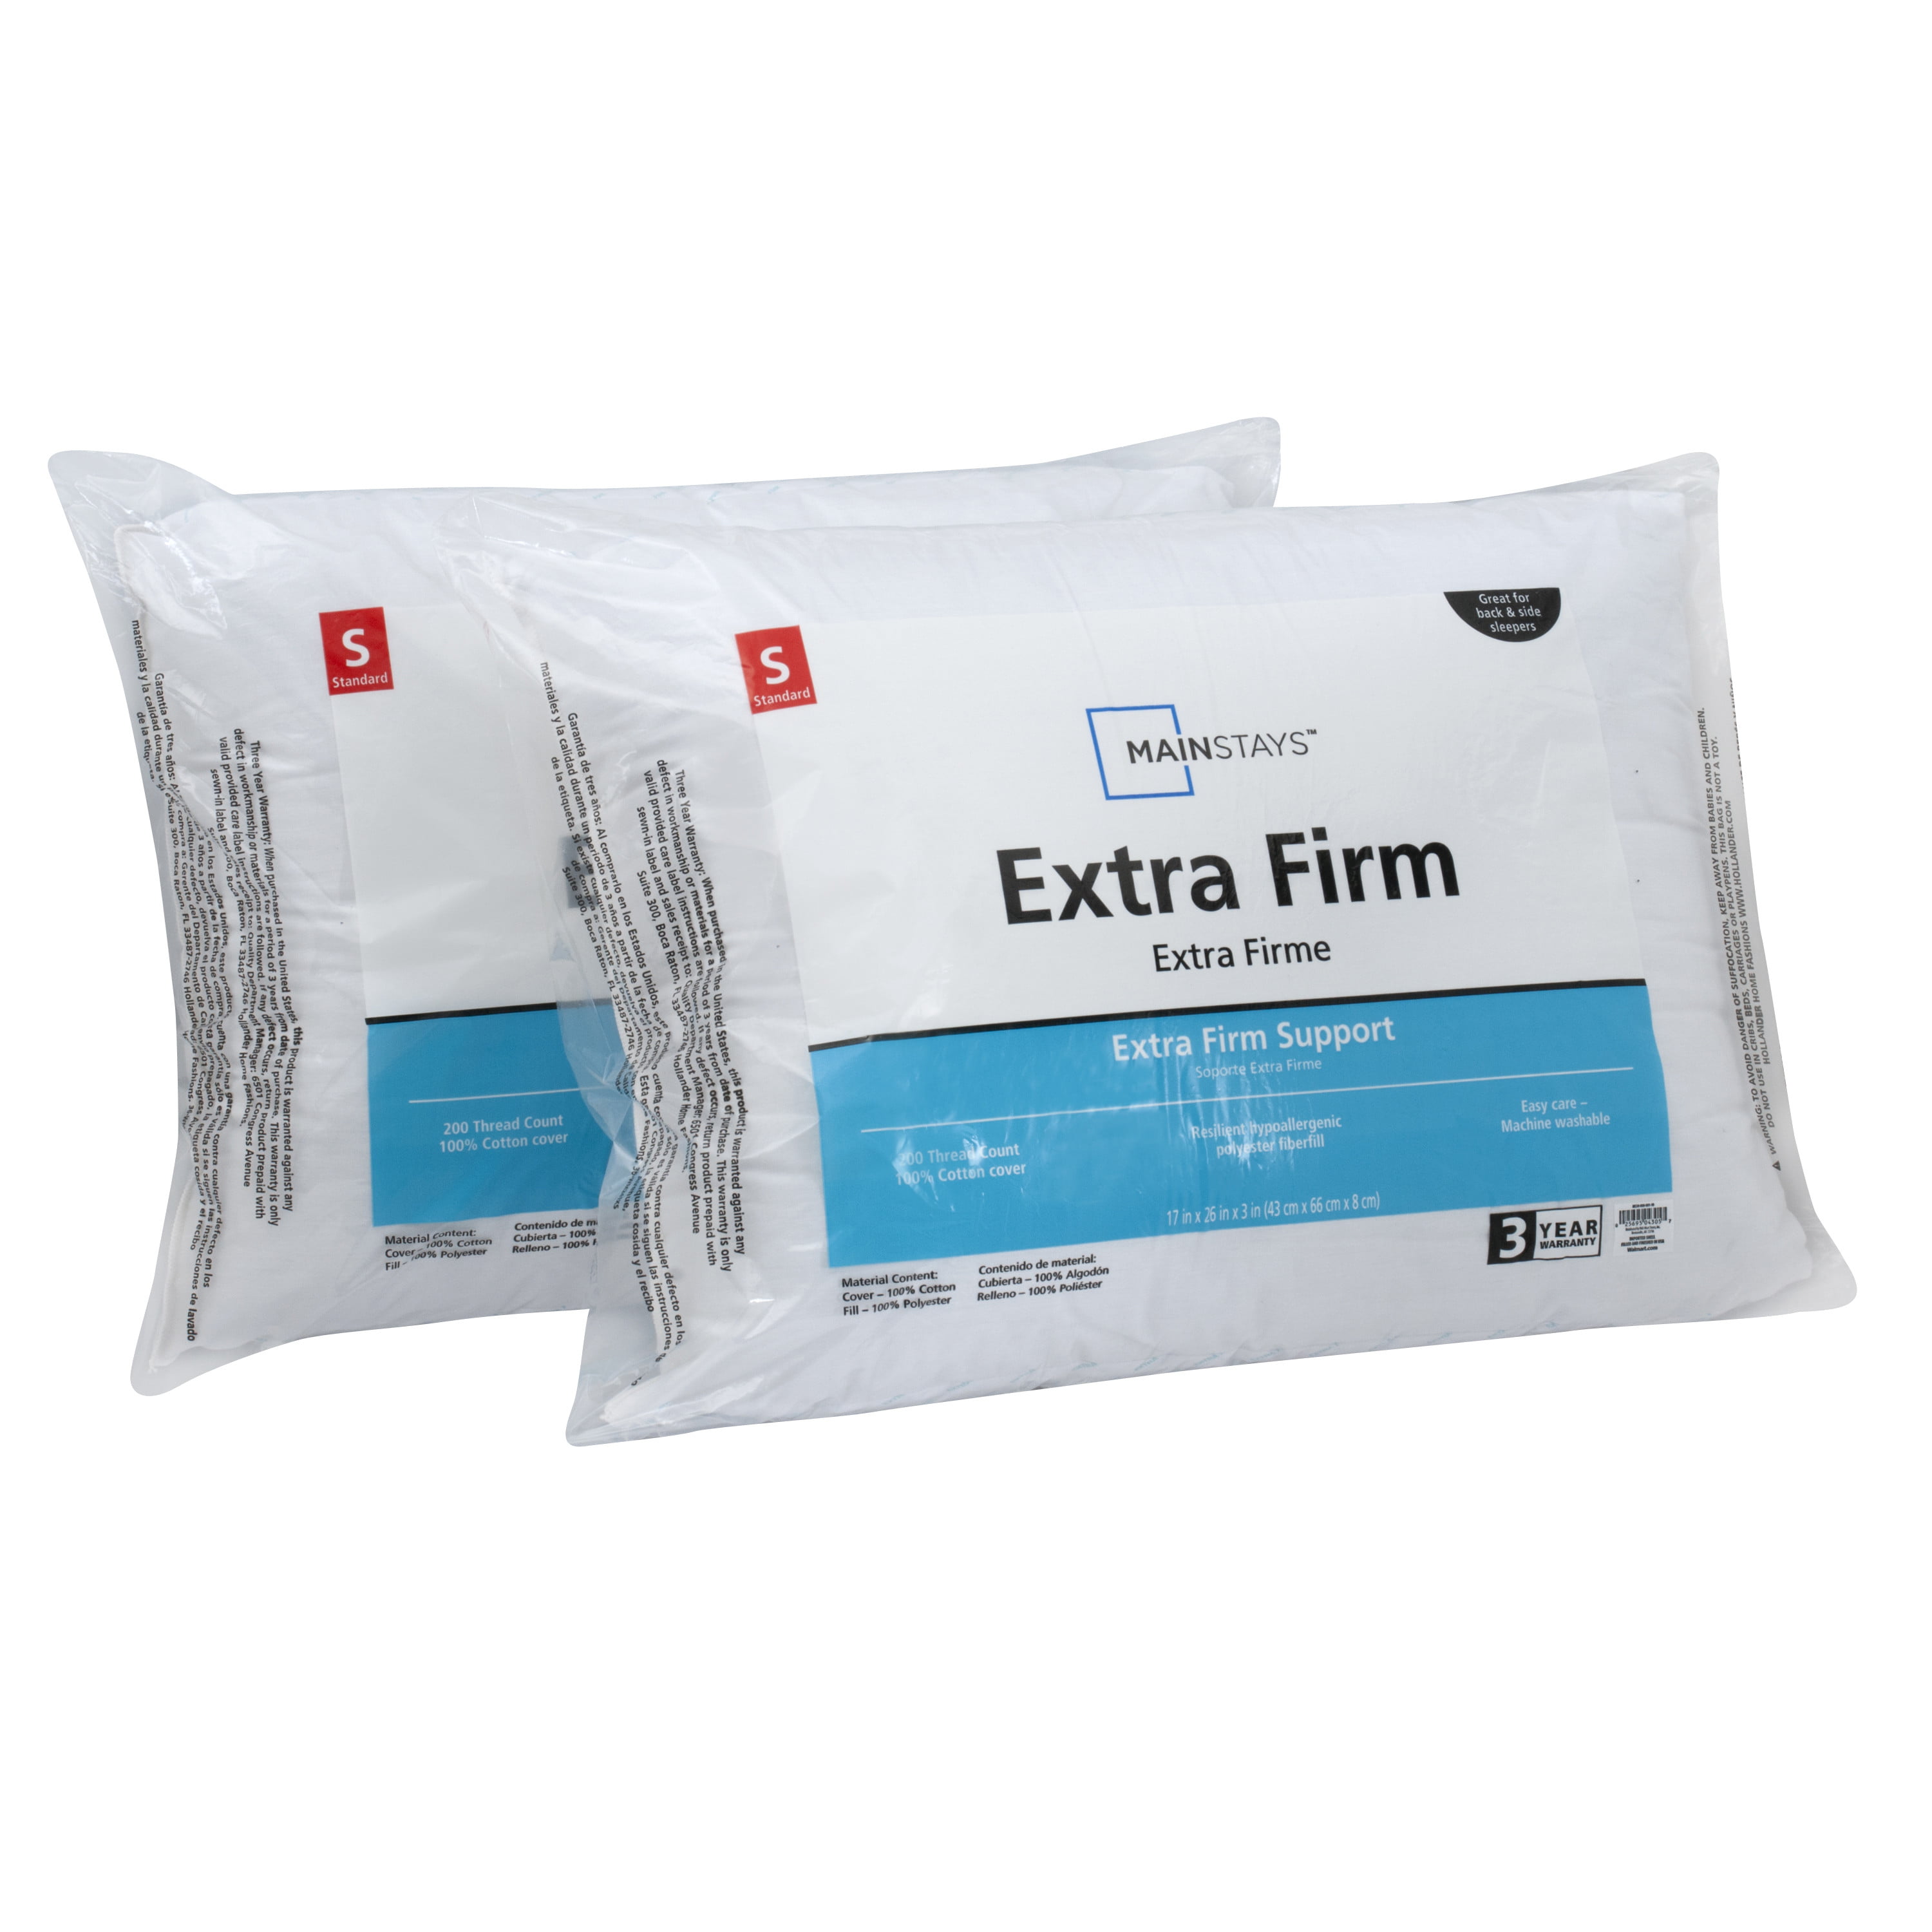 Extra Super Firm Pillow KING SIZE Set//2 Bed Pillows 3/" SuperSide FREE SHIPPING